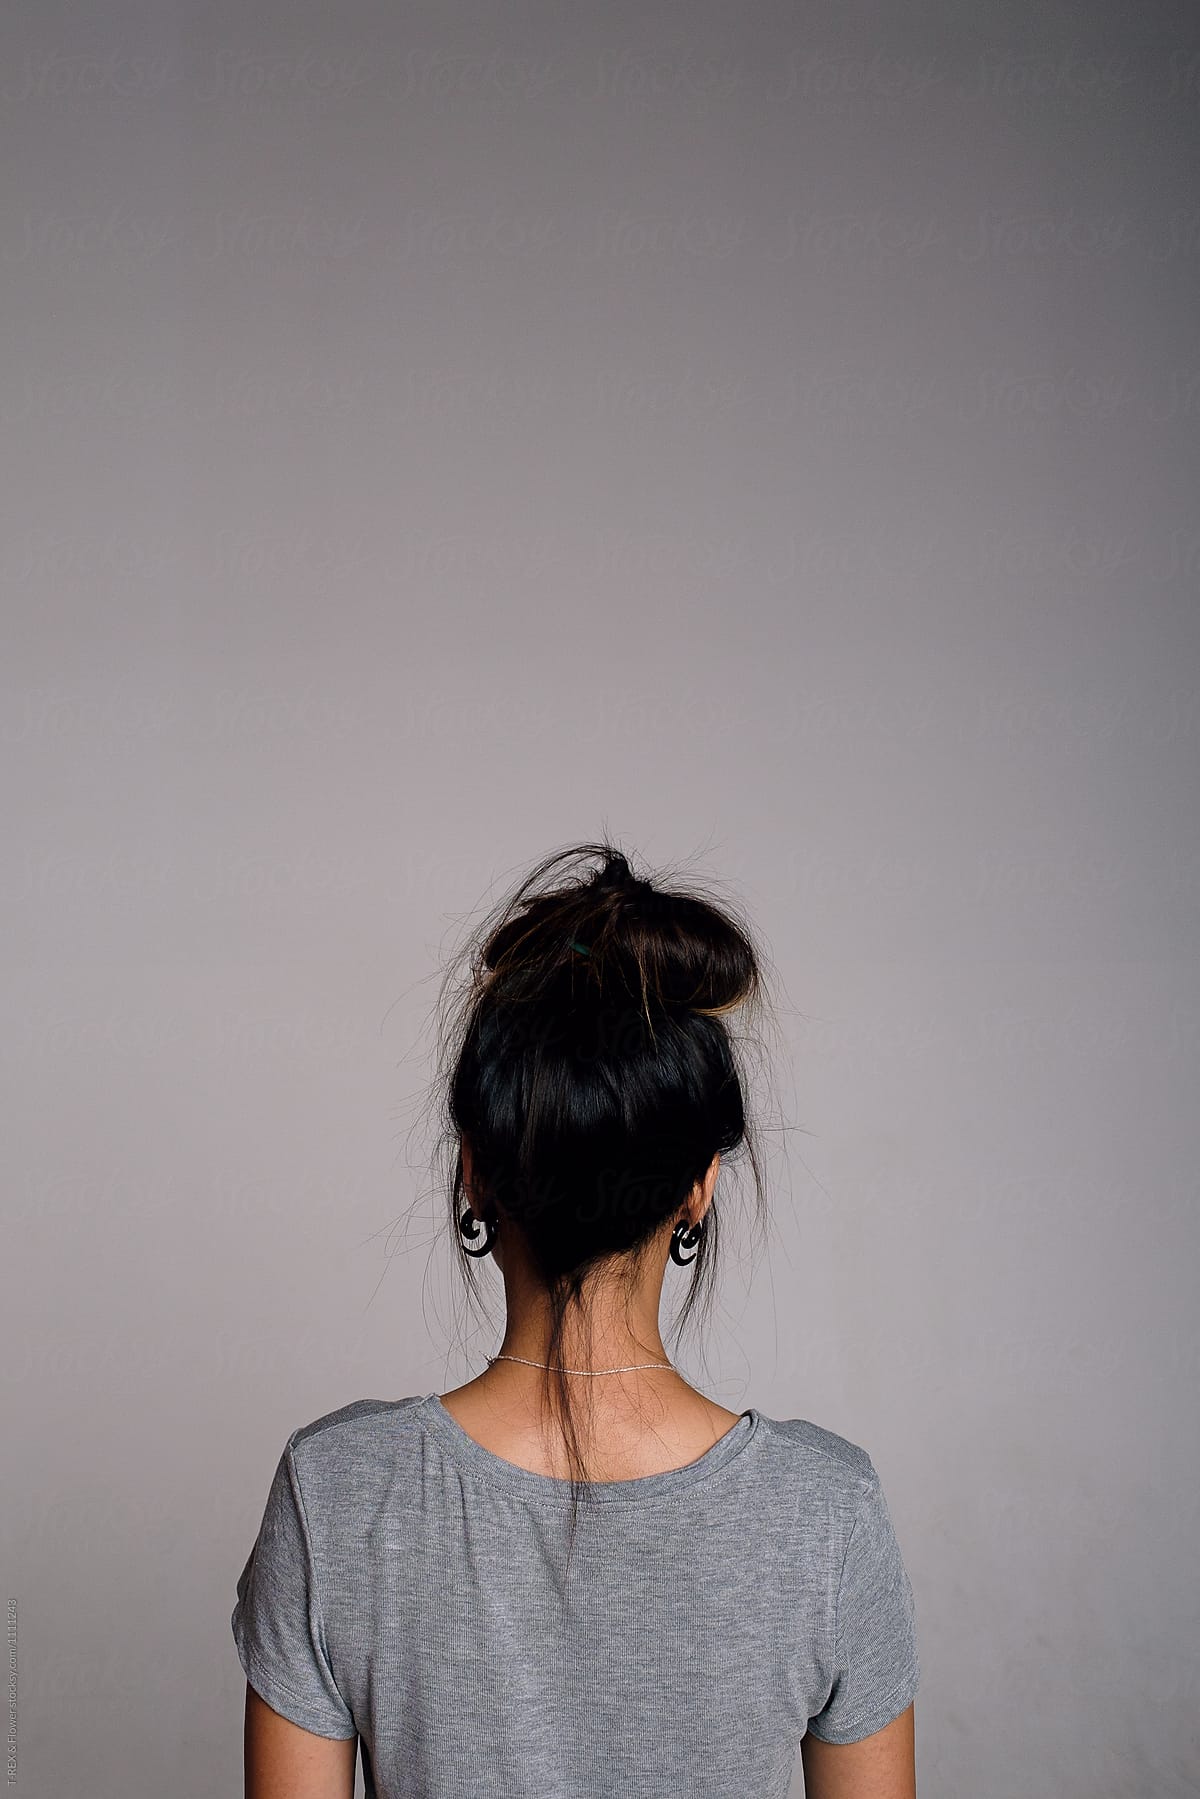 Back View Of Brunette Girl With Hairstyle Against Of Grey Background